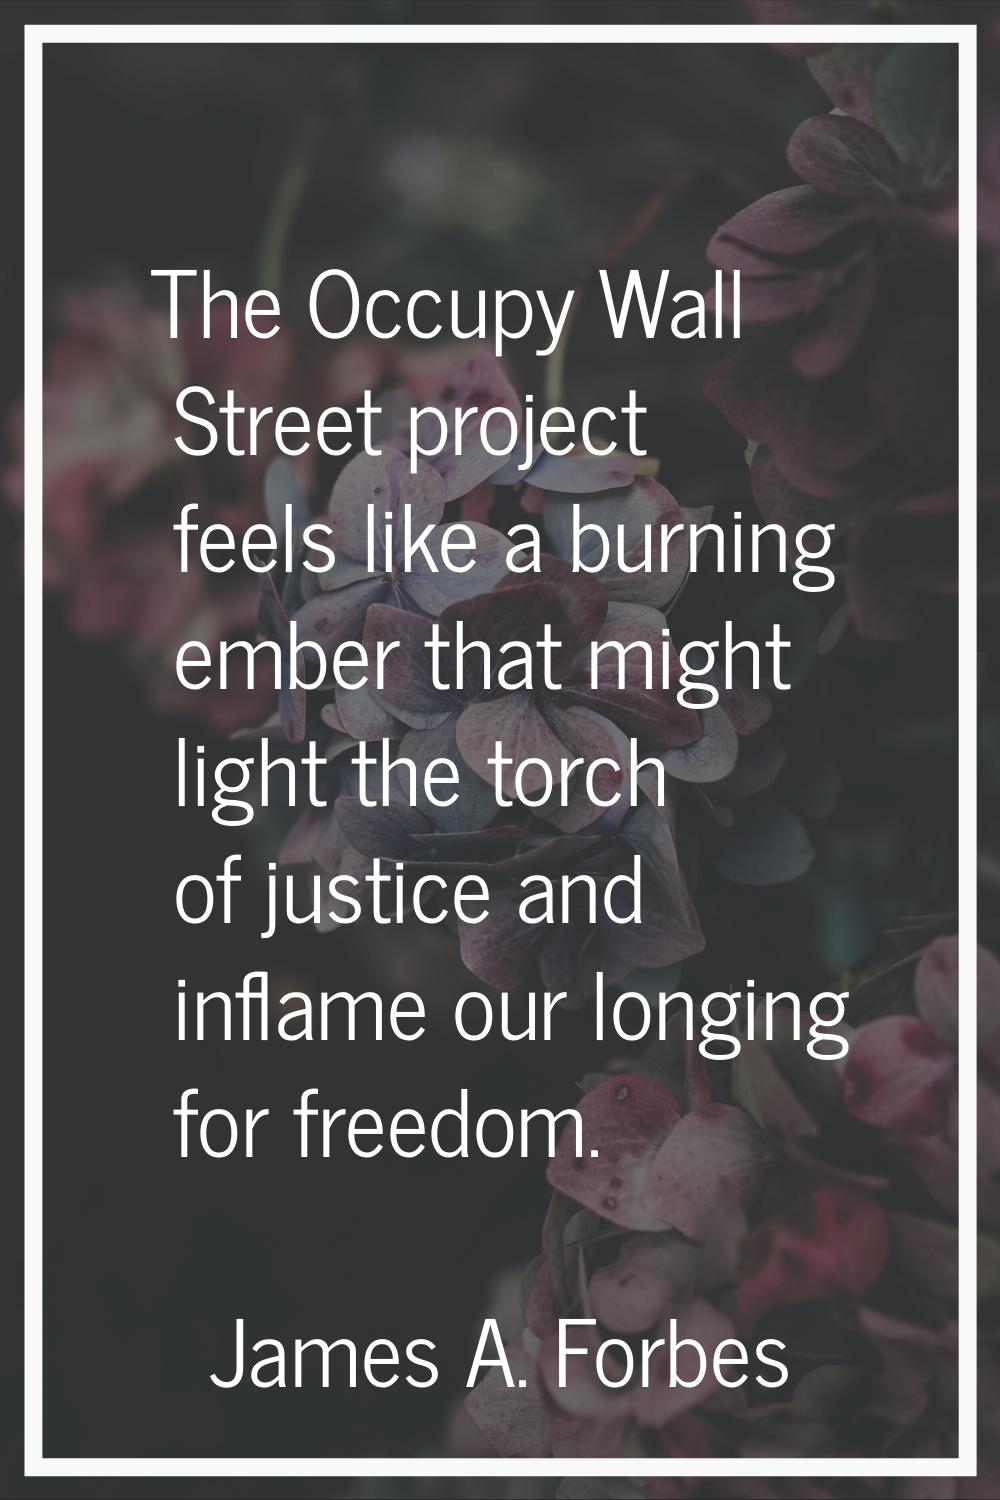 The Occupy Wall Street project feels like a burning ember that might light the torch of justice and